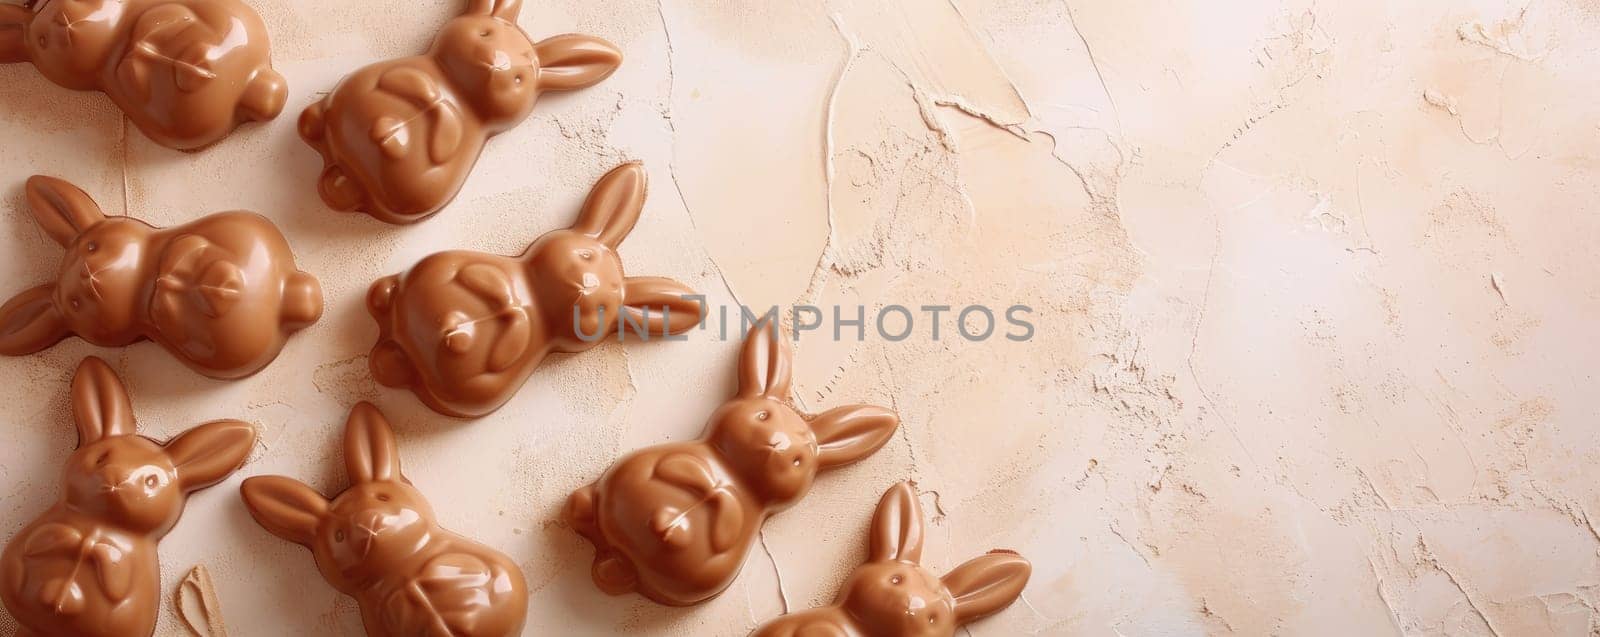 Banner with a set of chocolate bunnies for Easter holiday by Yurich32